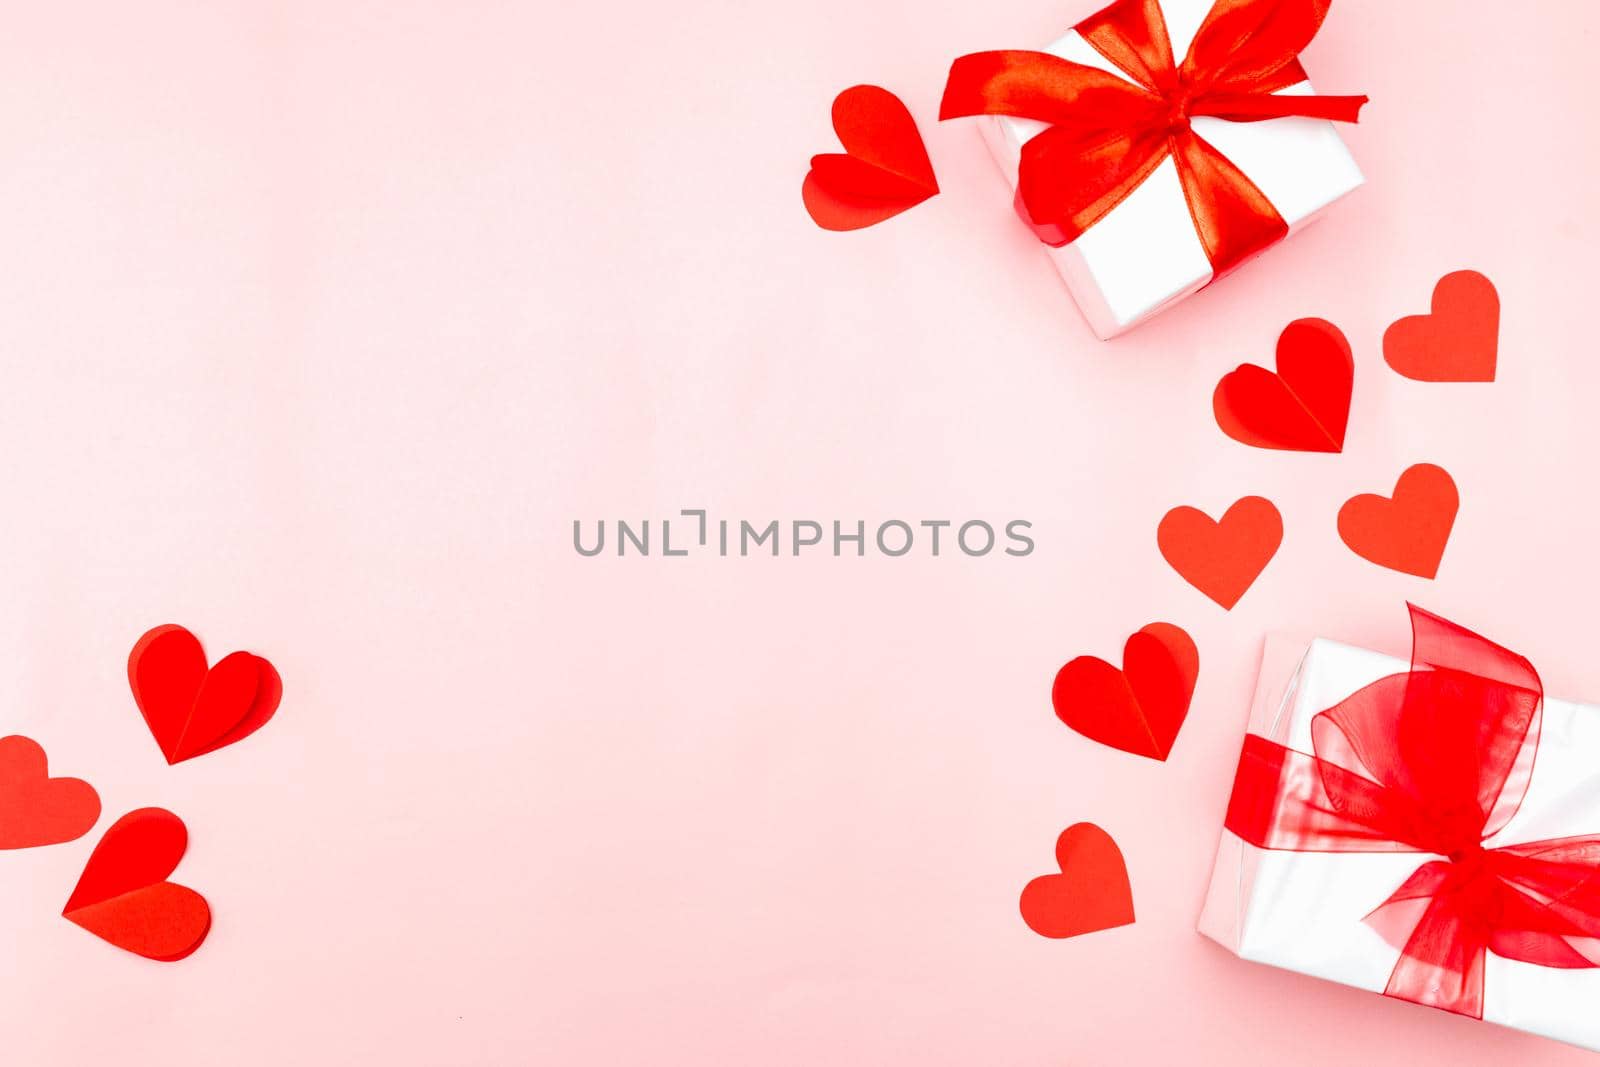 Valentine's Day. Gifts, hearts on rose background. Concept of love, affection. Holiday card.